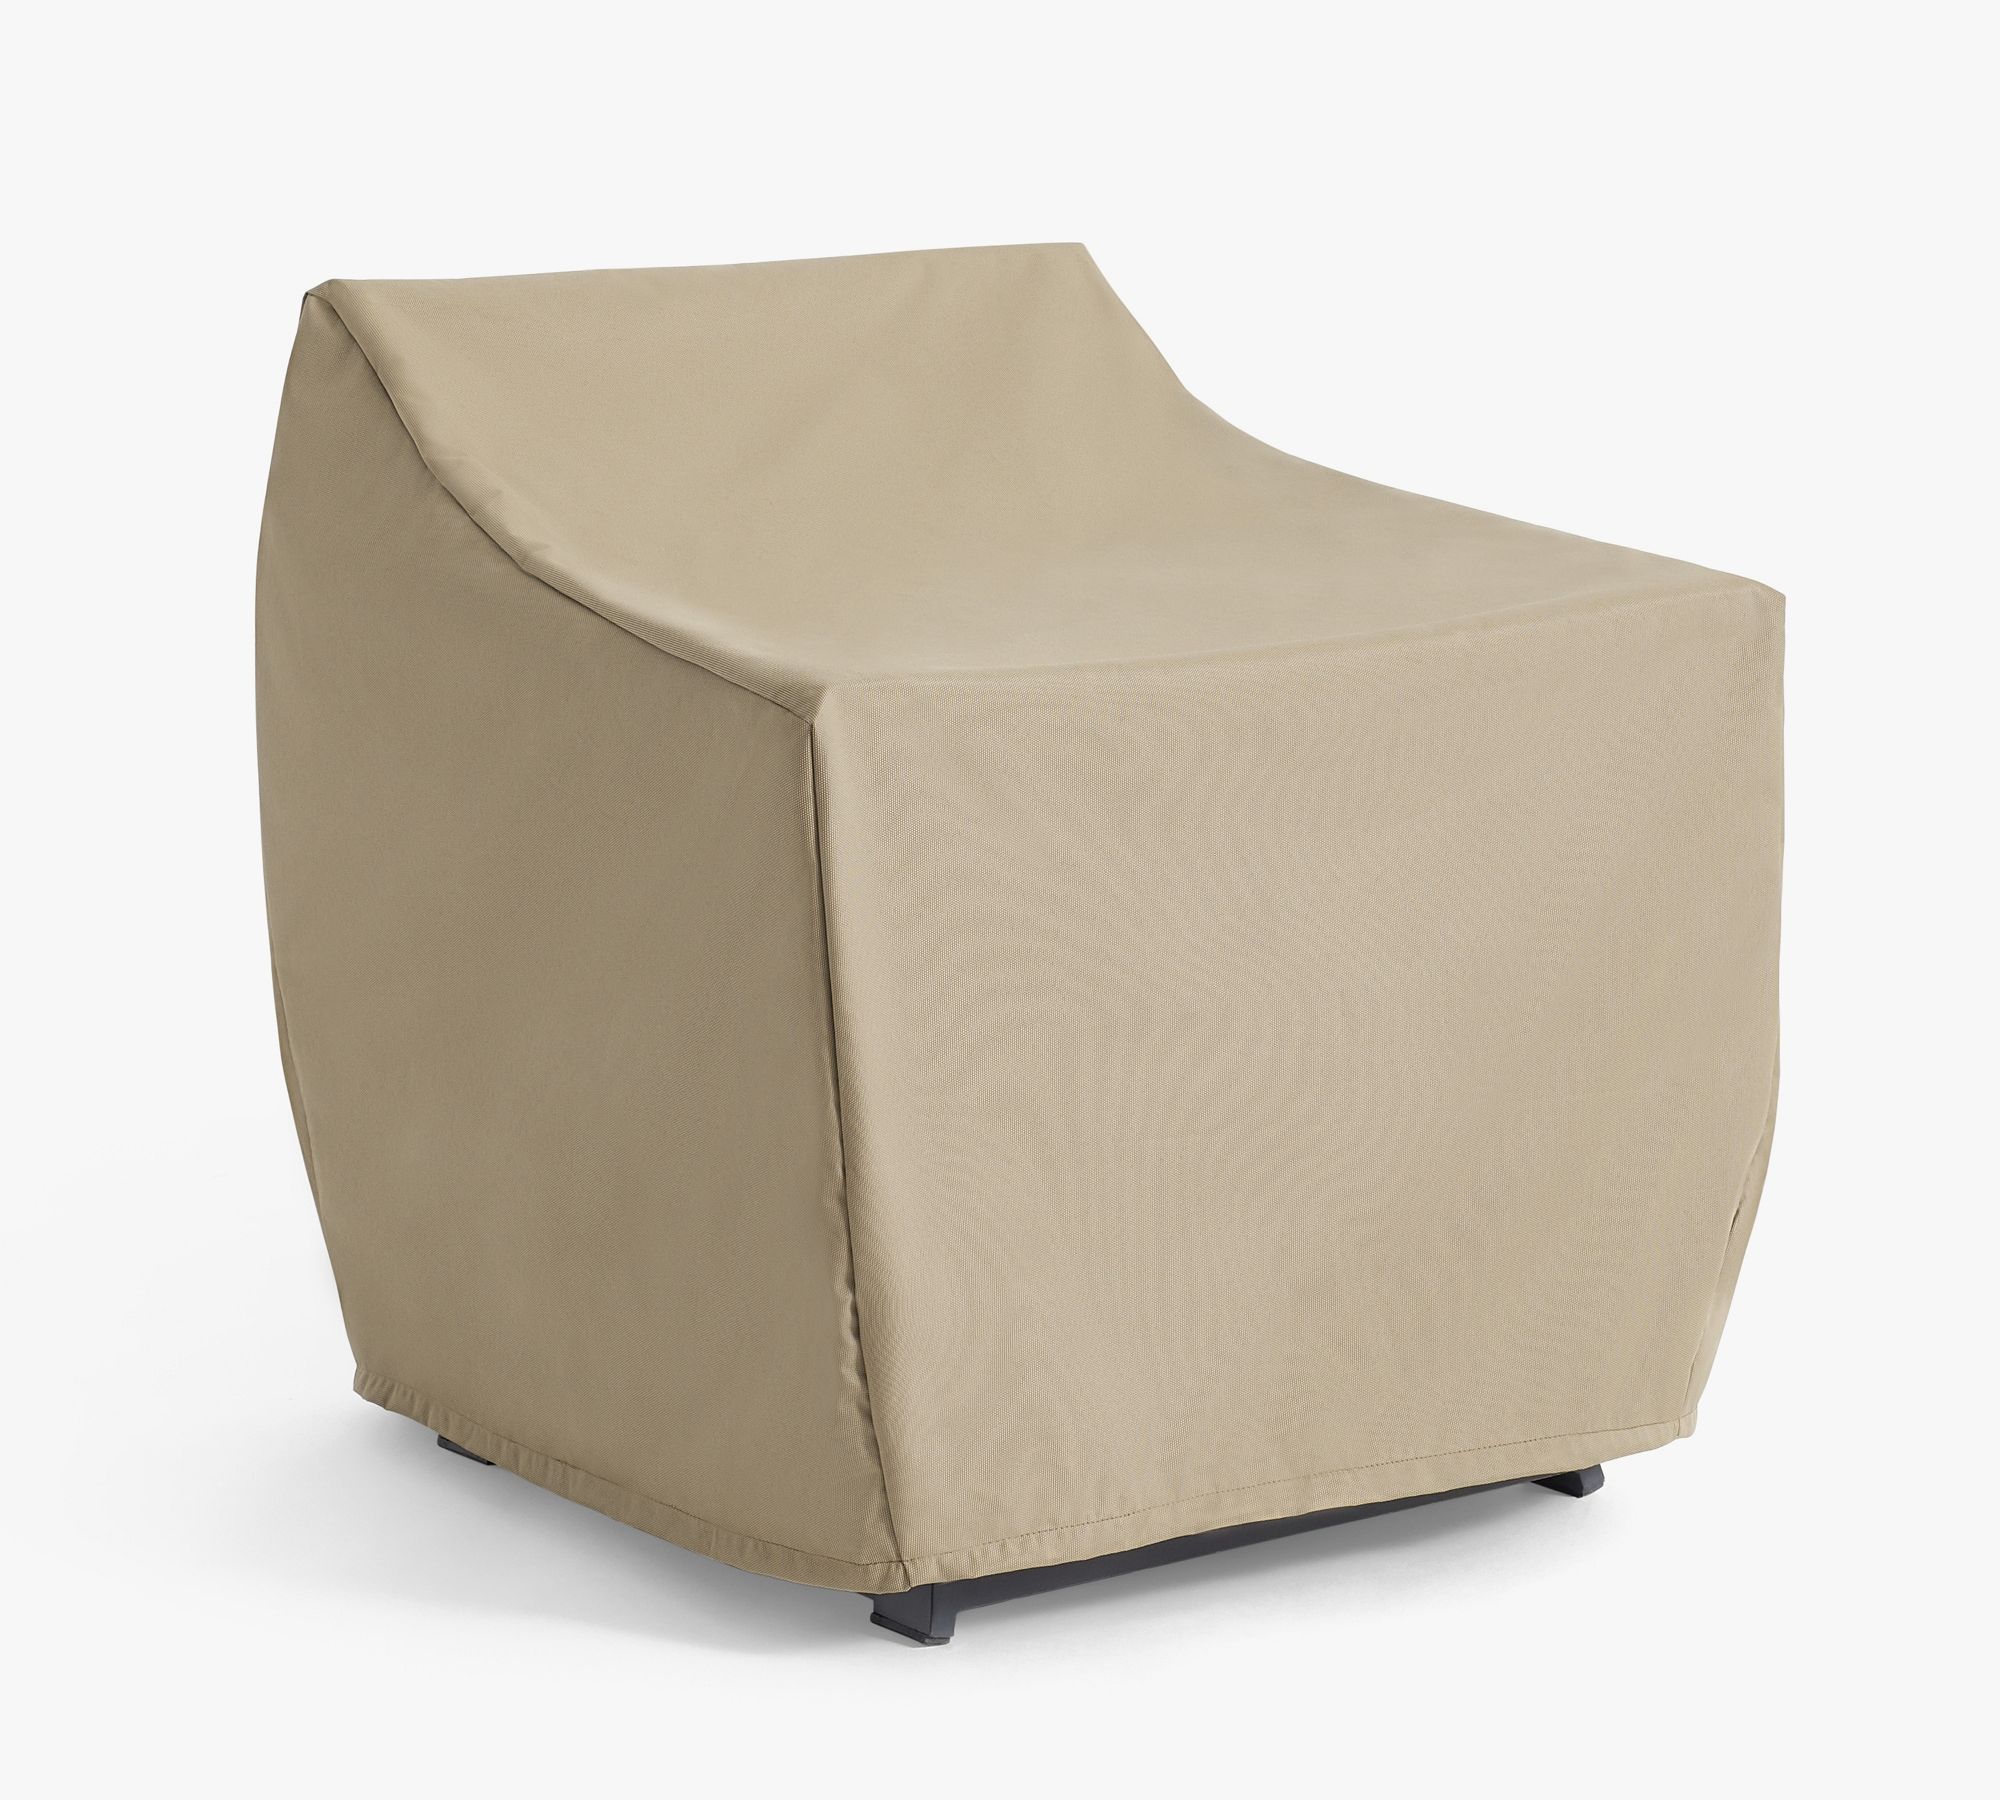 Indio Wood/Metal Custom-Fit Outdoor Covers - Swivel Lounge Chair